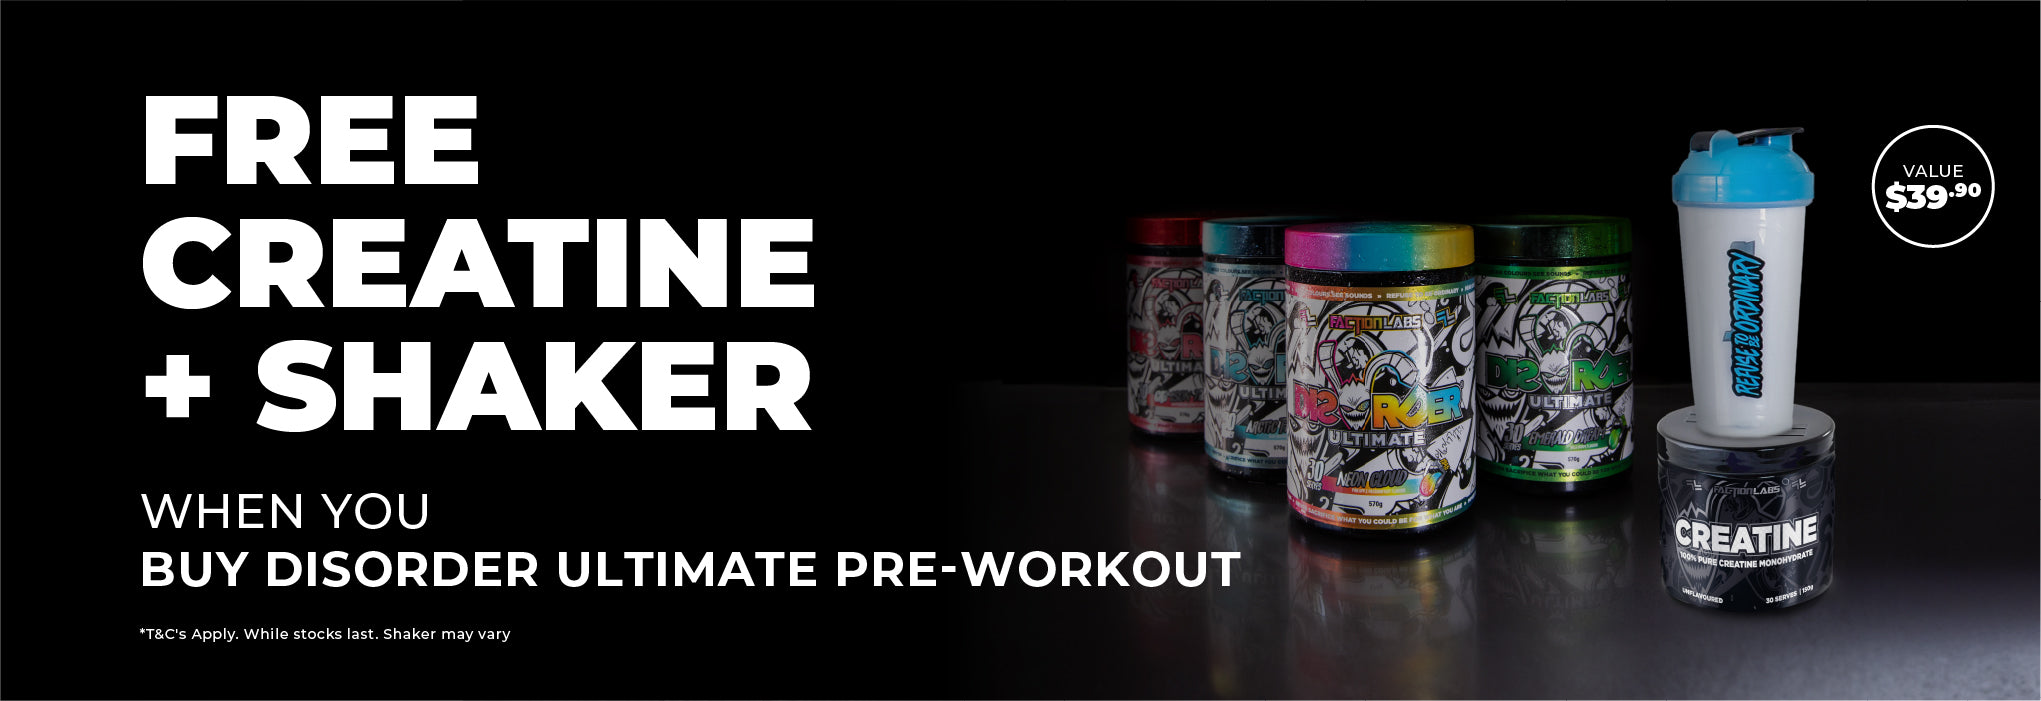 ASN May Deal - FREE Creatine + Shaker with Disorder Ultimate